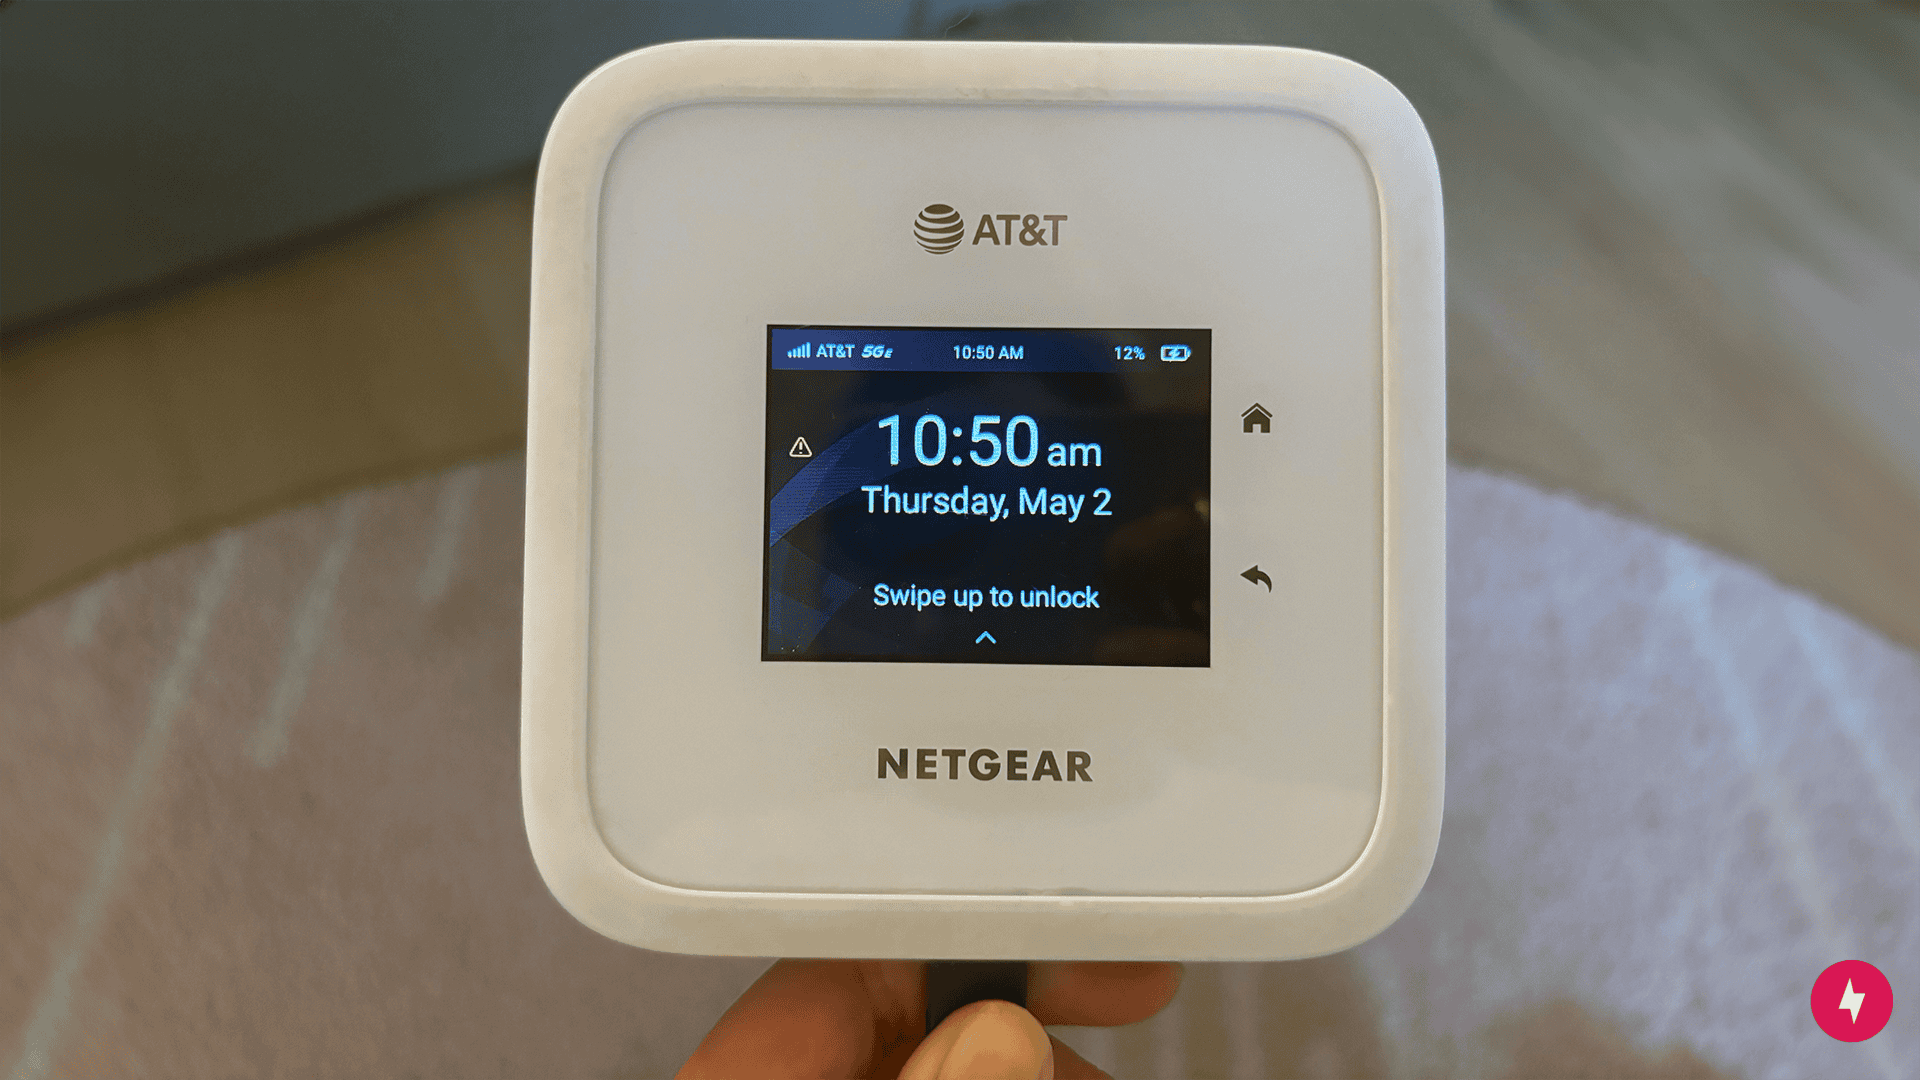 Closeup photo of AT&T Netgear Nighthawk M6 with the date and time shown on the screen.